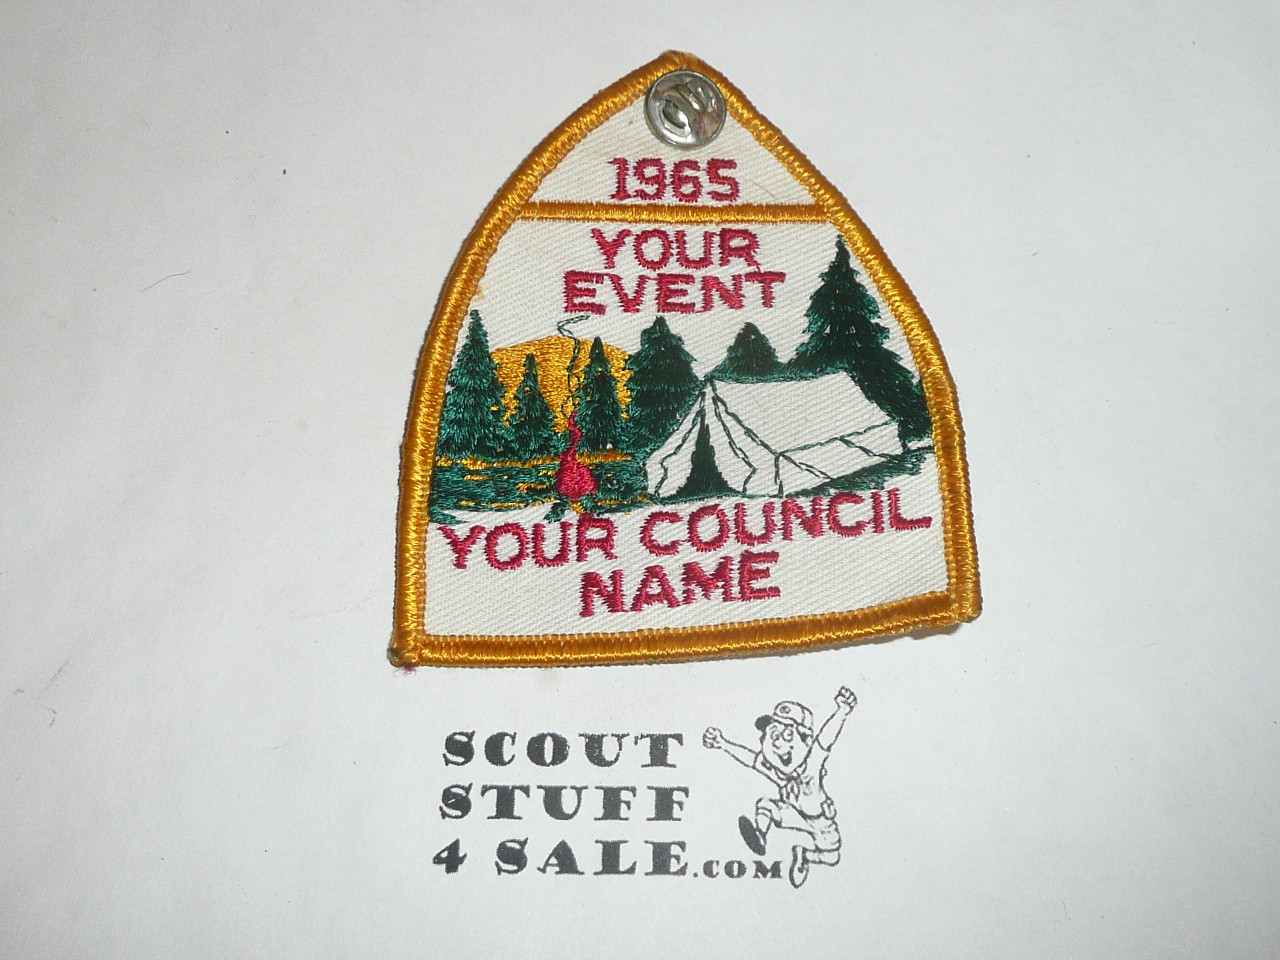 Your Council Name Sample Patch, 1965 Your Event